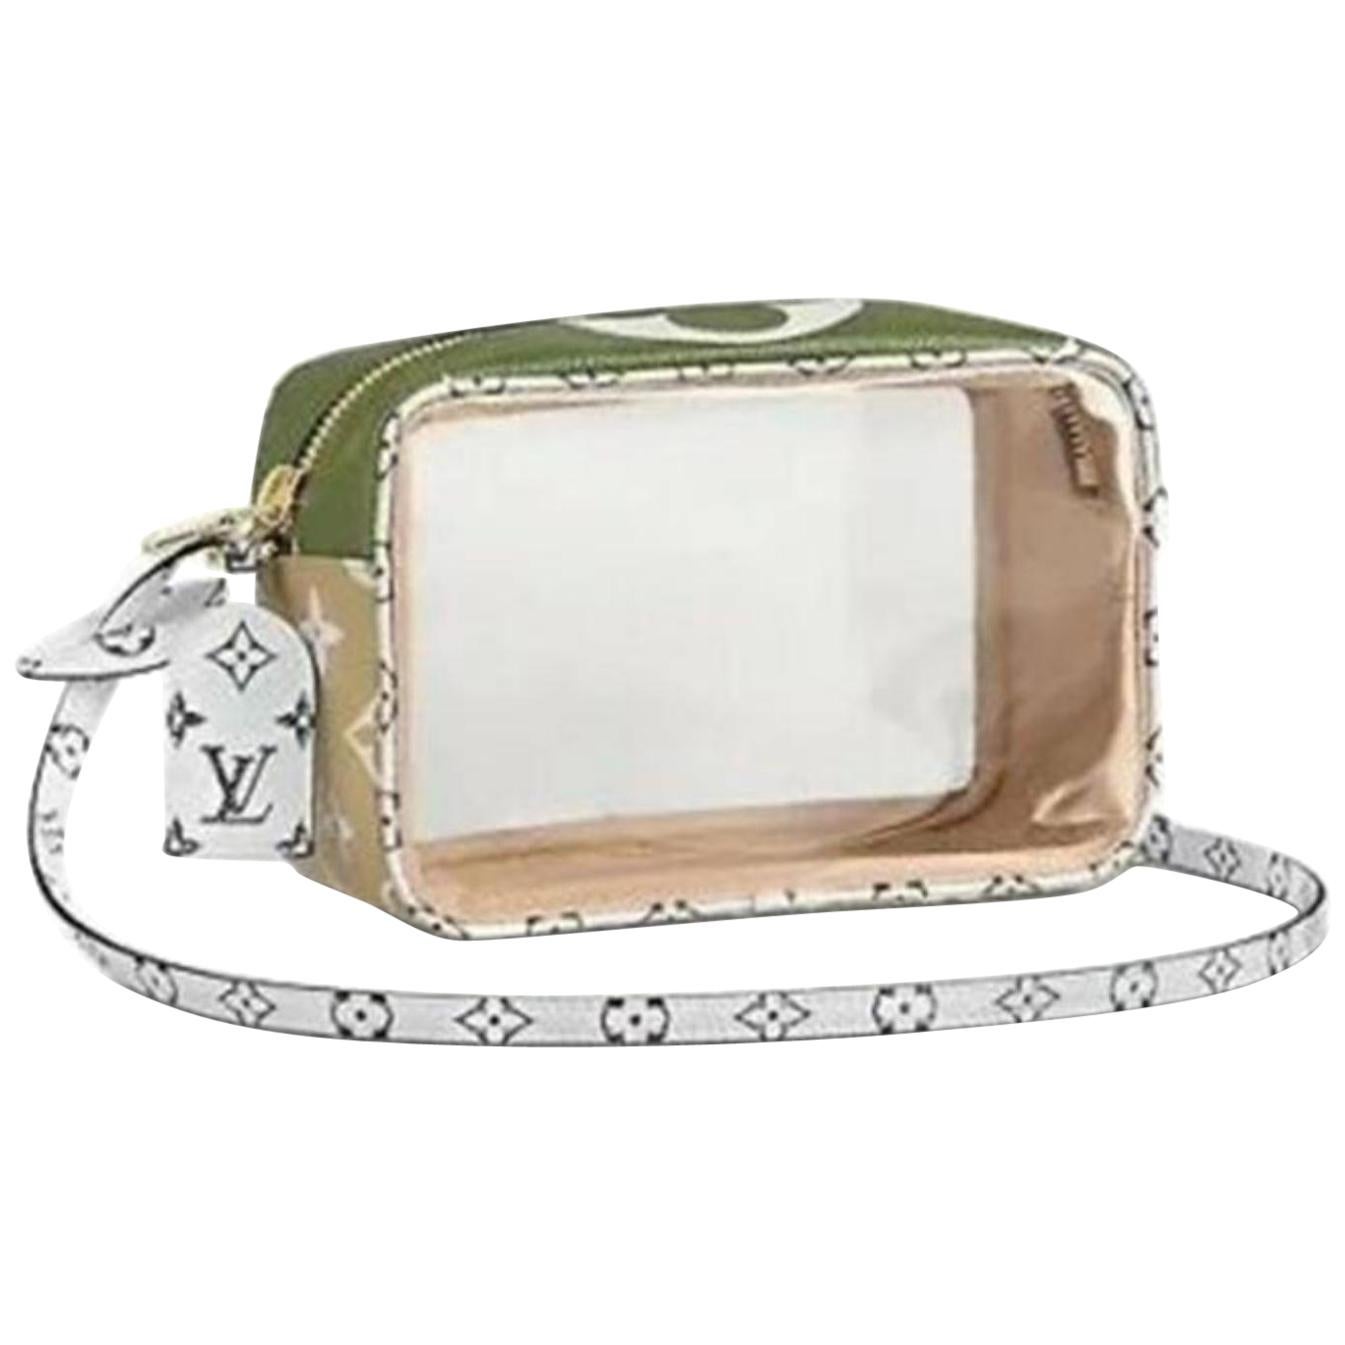 Louis Vuitton Translucent Ss19 Giants Pouch Clear Camera 870431 Red  Shoulder Bag at 1stDibs